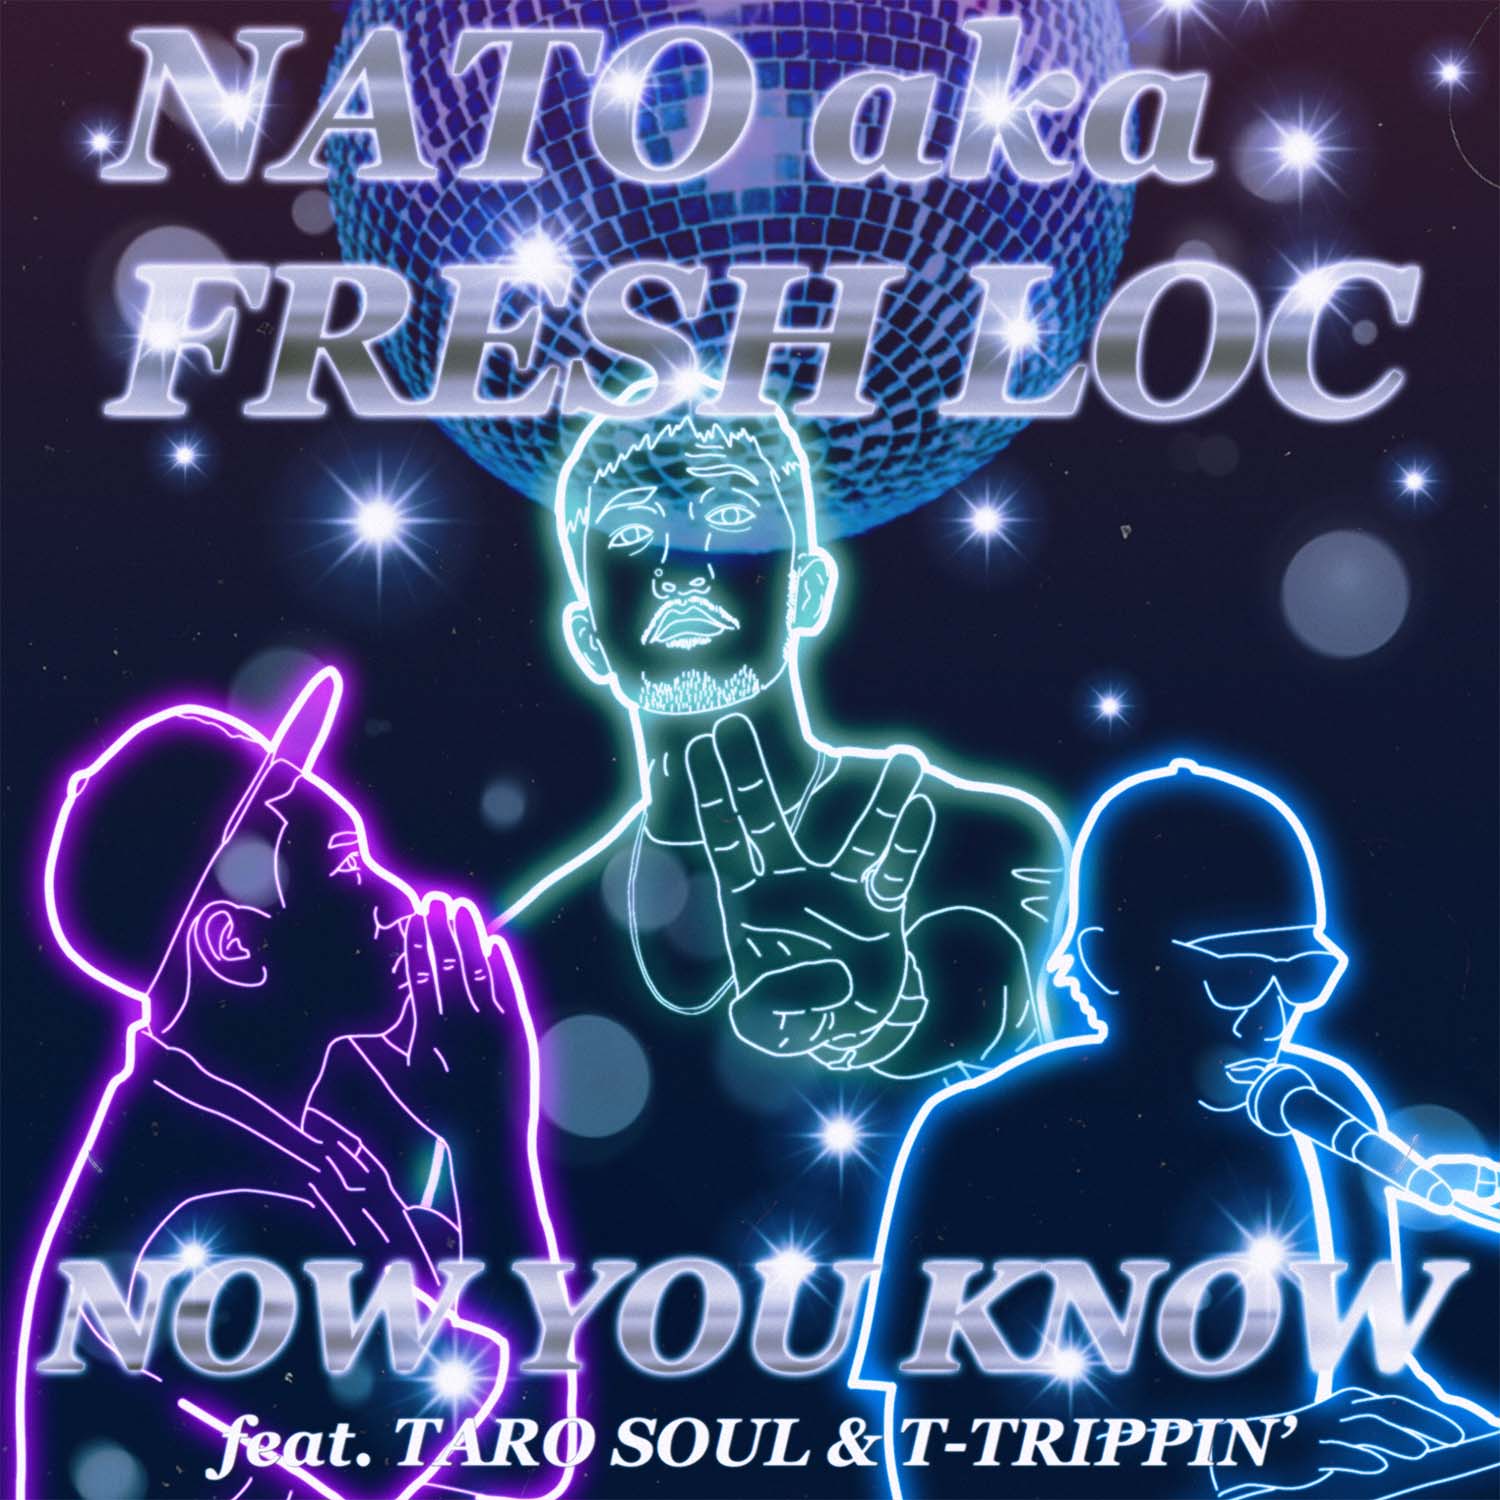 NATO a.k.a. Fresh Loc feat. TARO SOUL & T-TRIPPIN’ (DAZZLE 4 LIFE)「Now You Know」